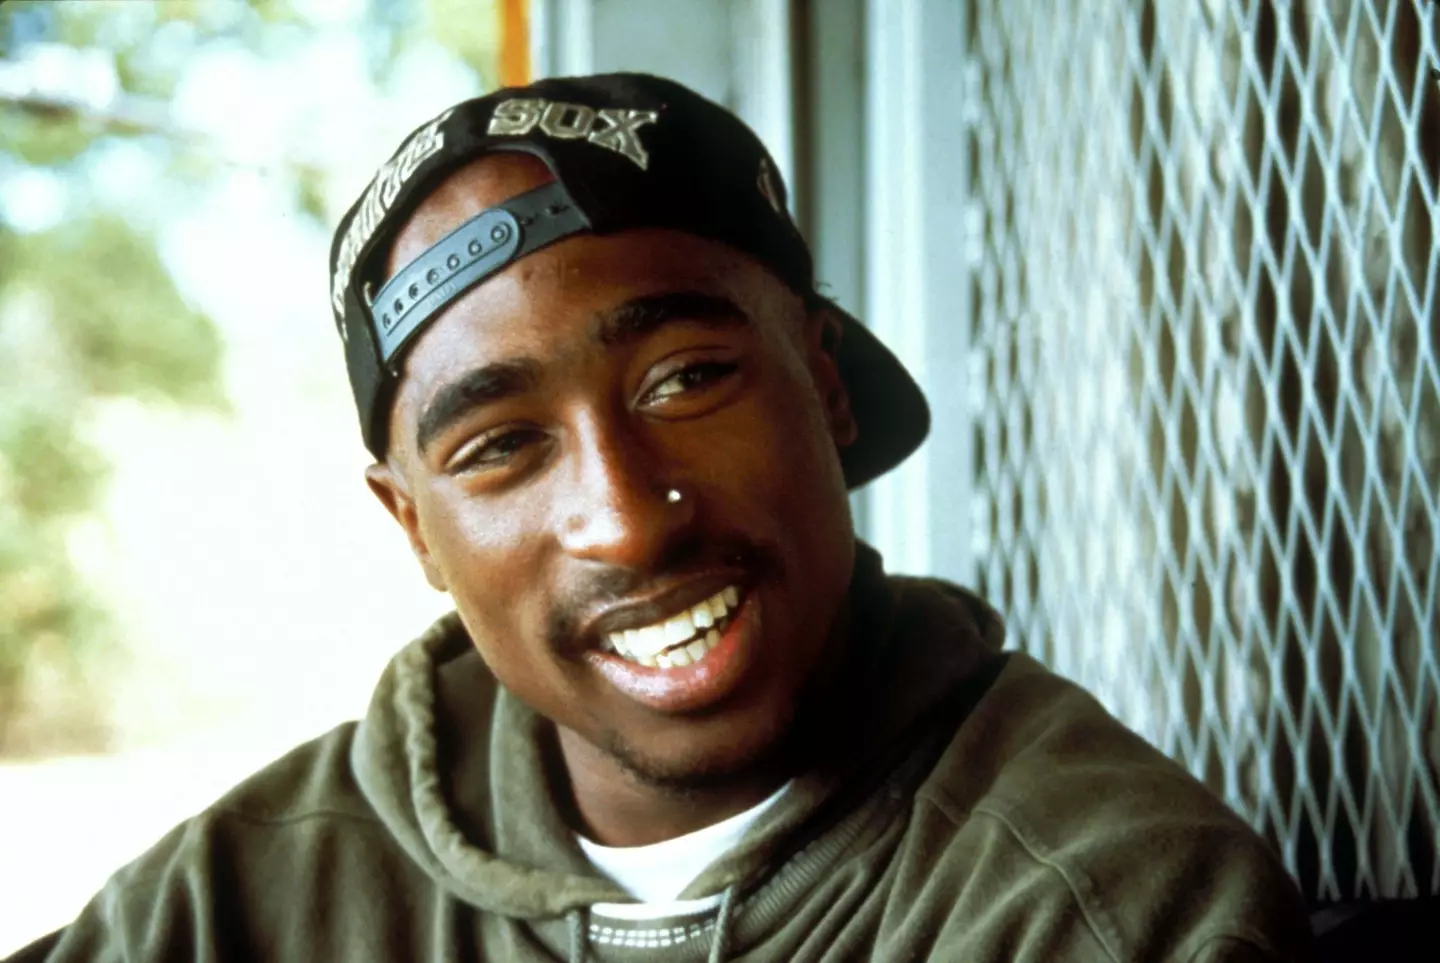 Tupac Shakur is being commemorated by Oakland City Council.